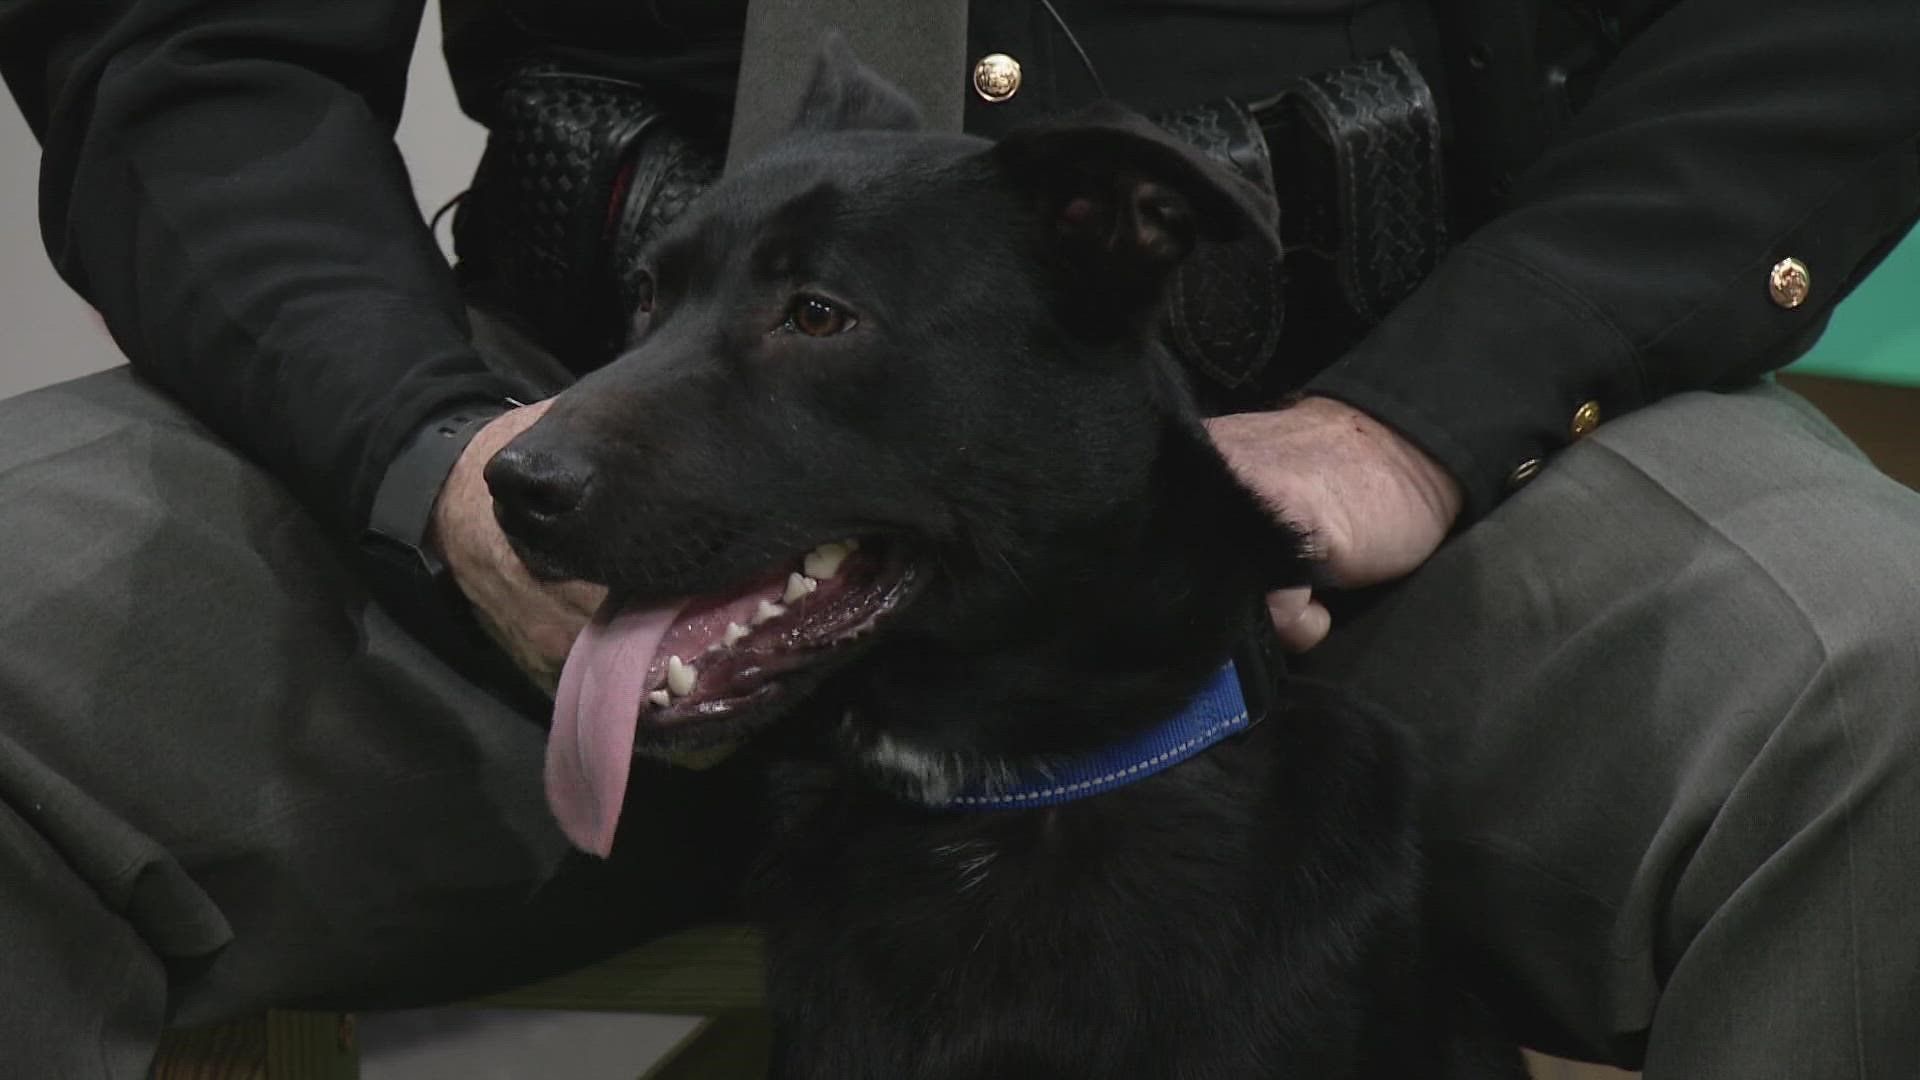 The Stark County Sheriff's Department joined 3News to bring in Ed, a dog that is looking to find a new home. Ed is a stray dog that is ready for adoption.